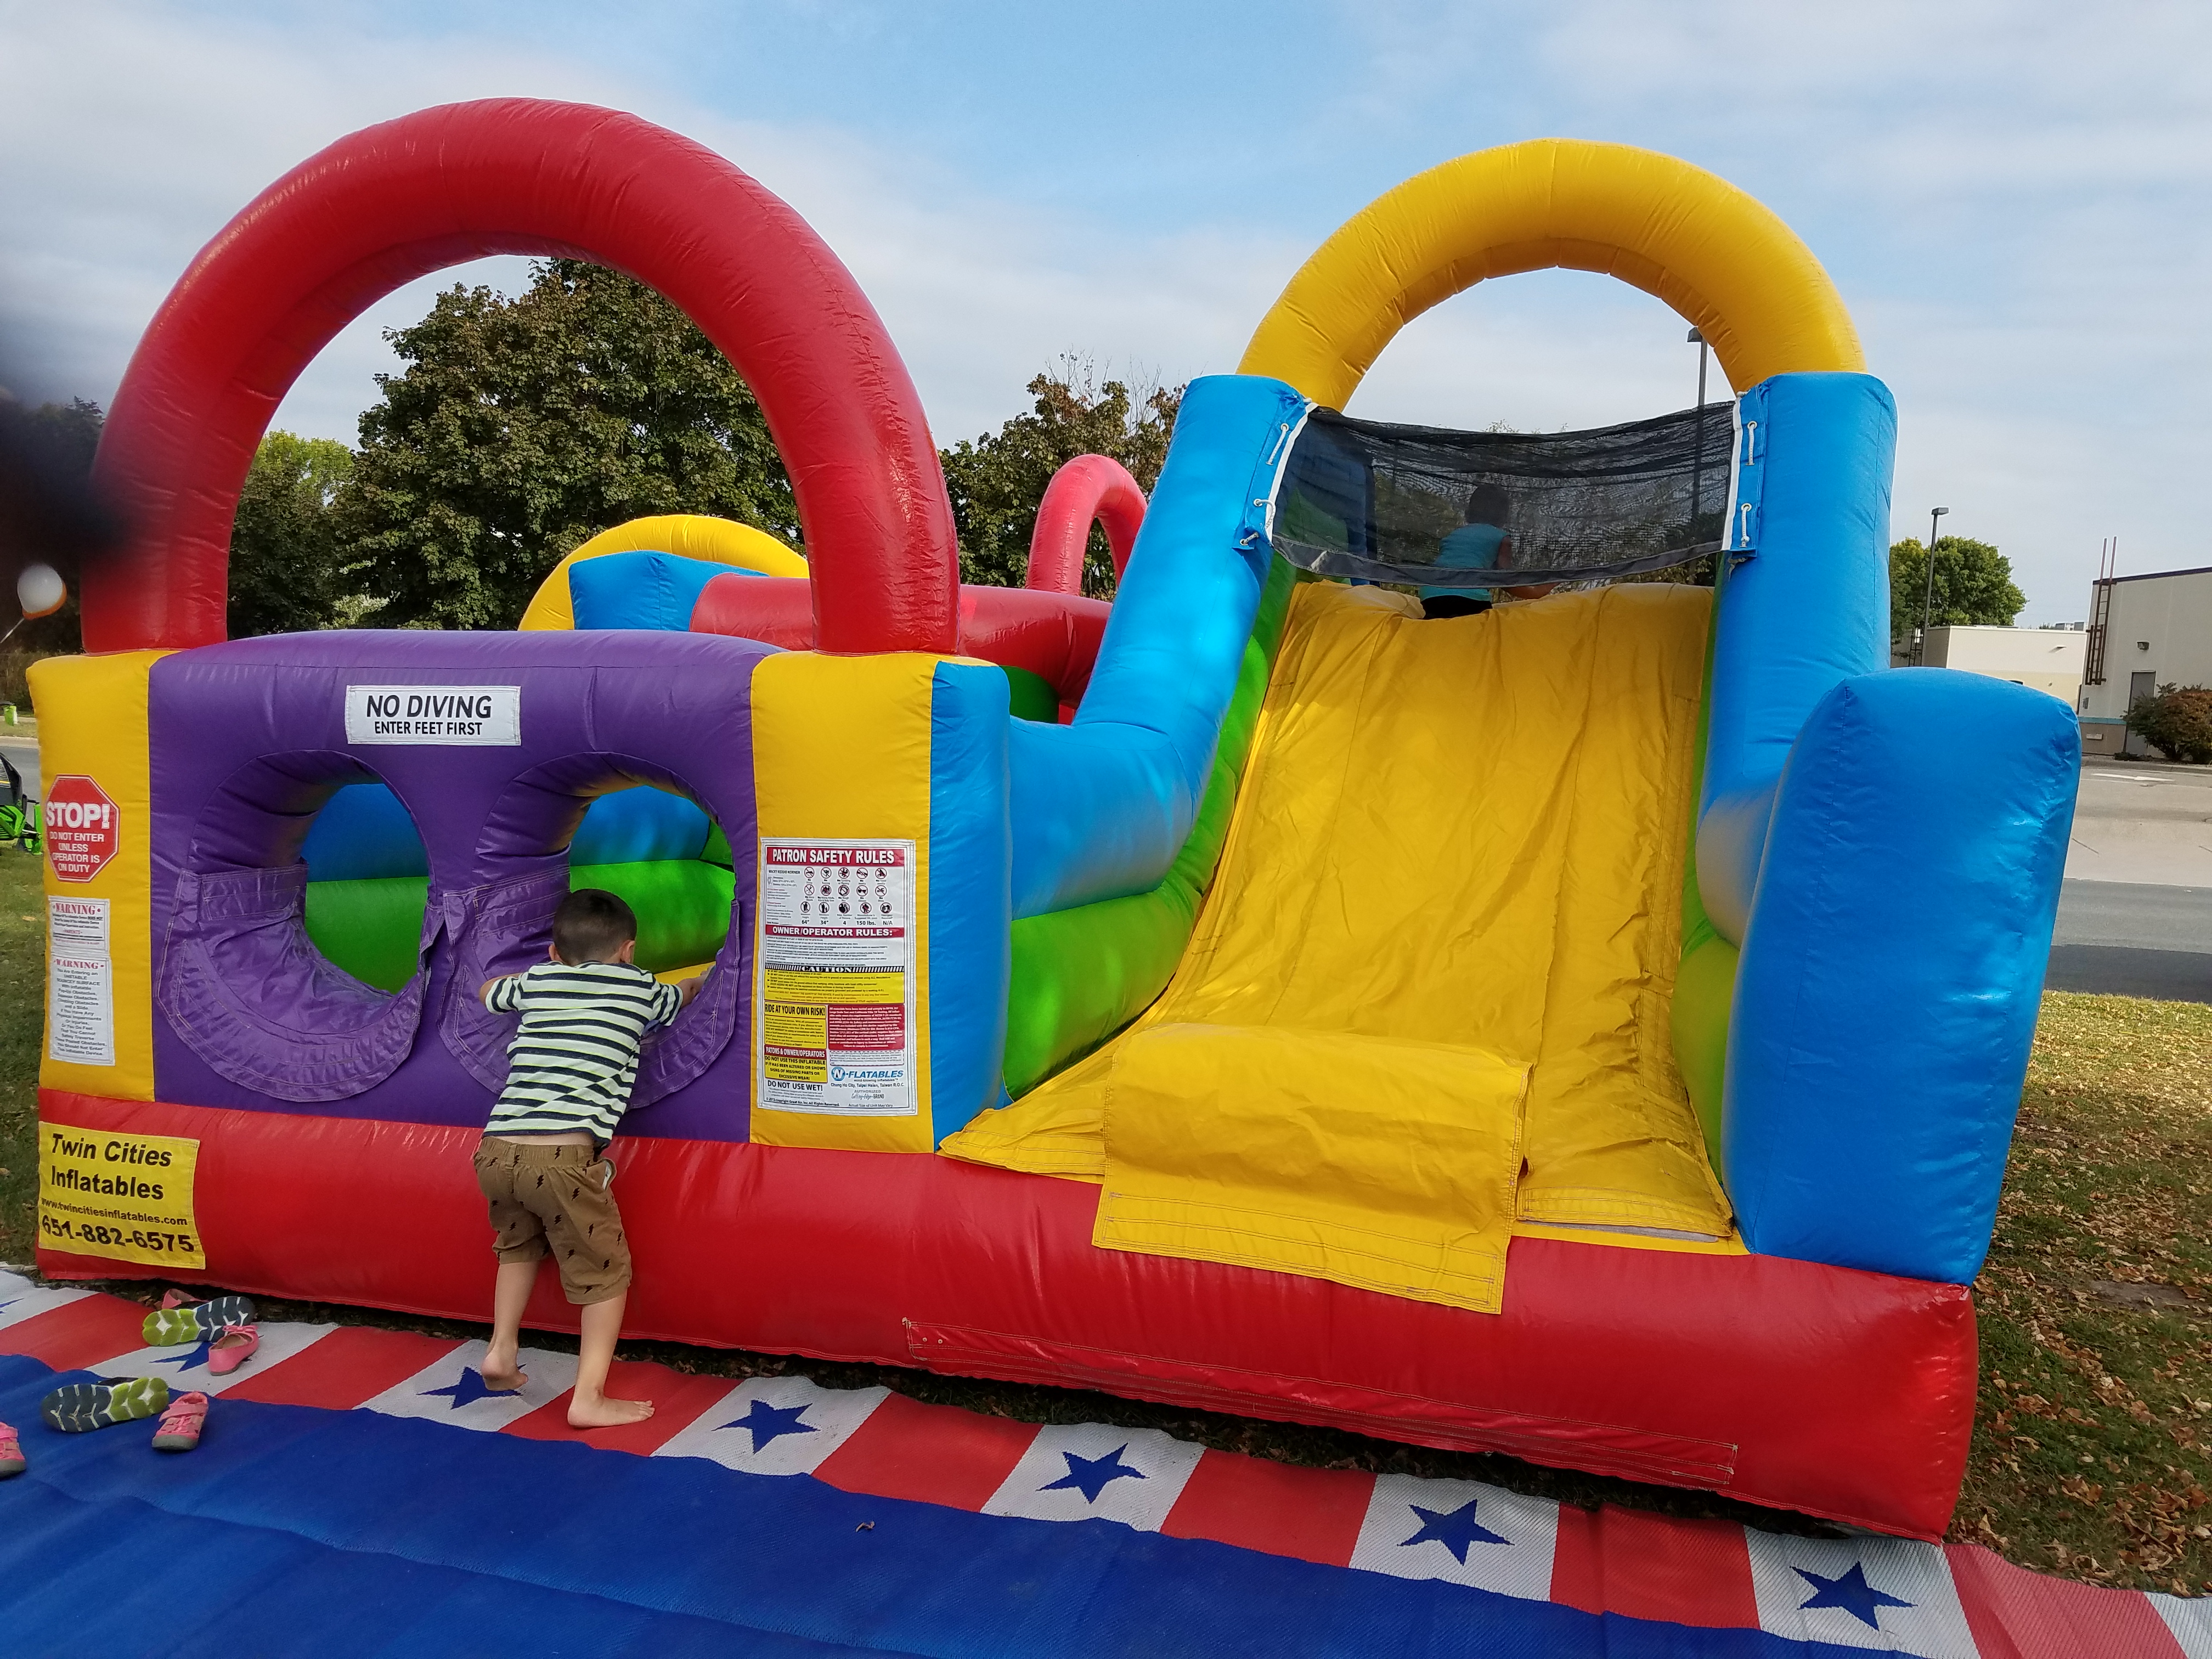 Kids playing in a bounce house at the 2017 Lighhouse Motorsports & Marine open house